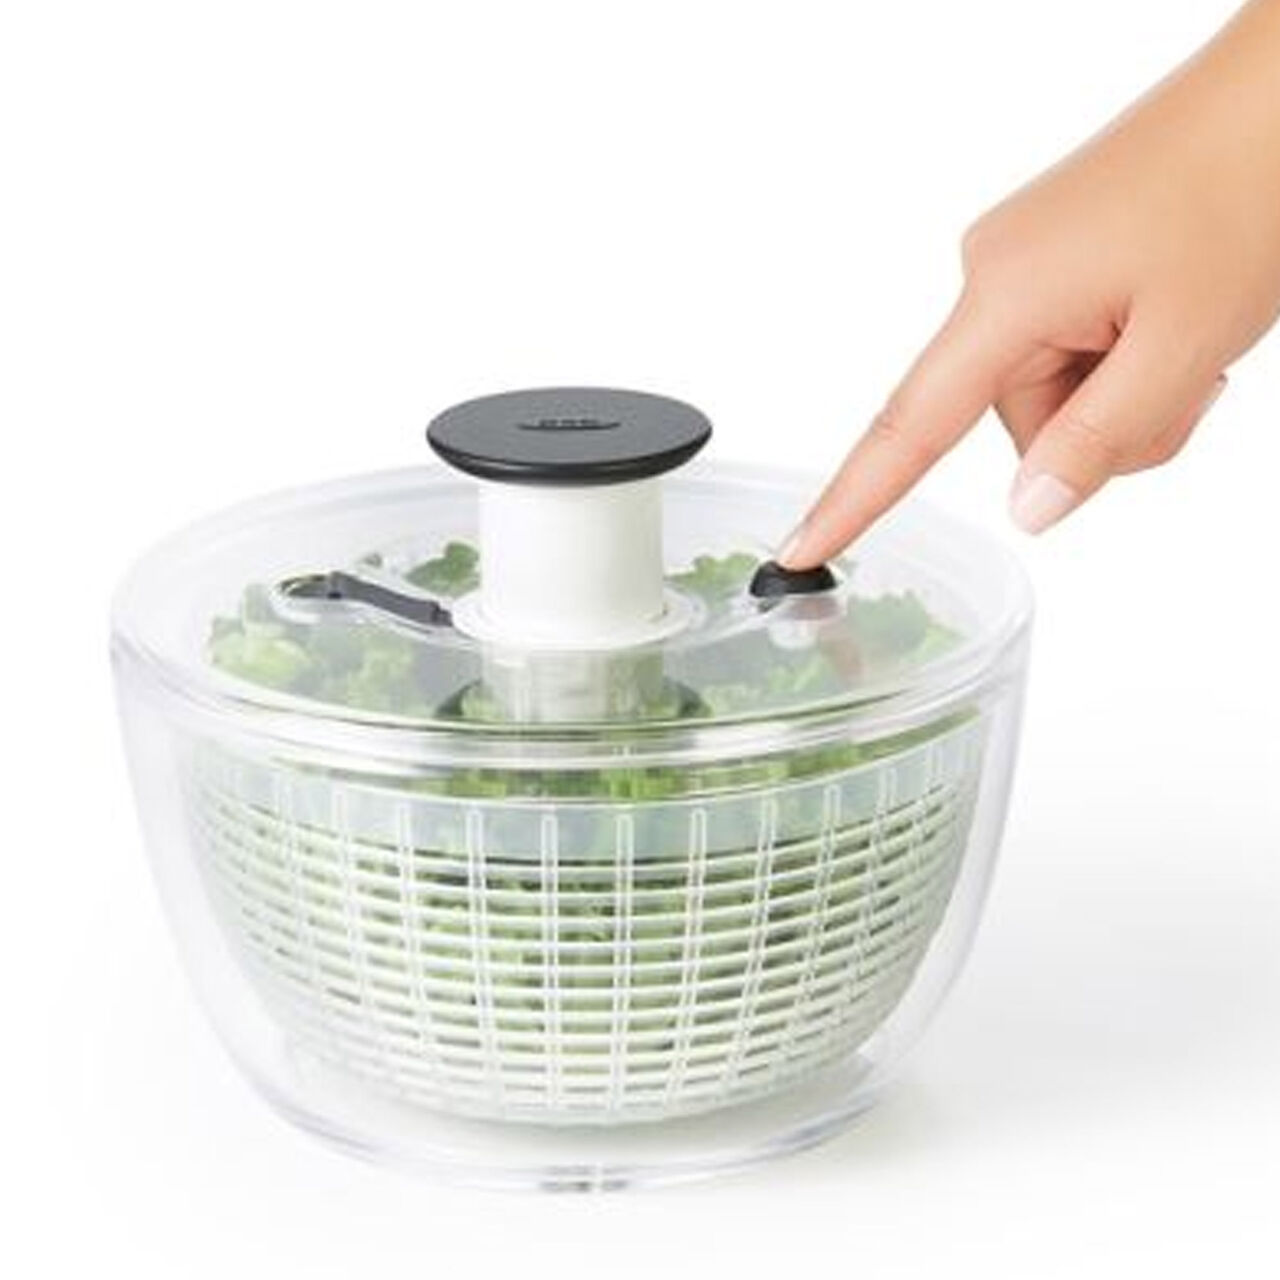 OXO Good Grips Mini Salad Spinner - #1045409, , large image number 0